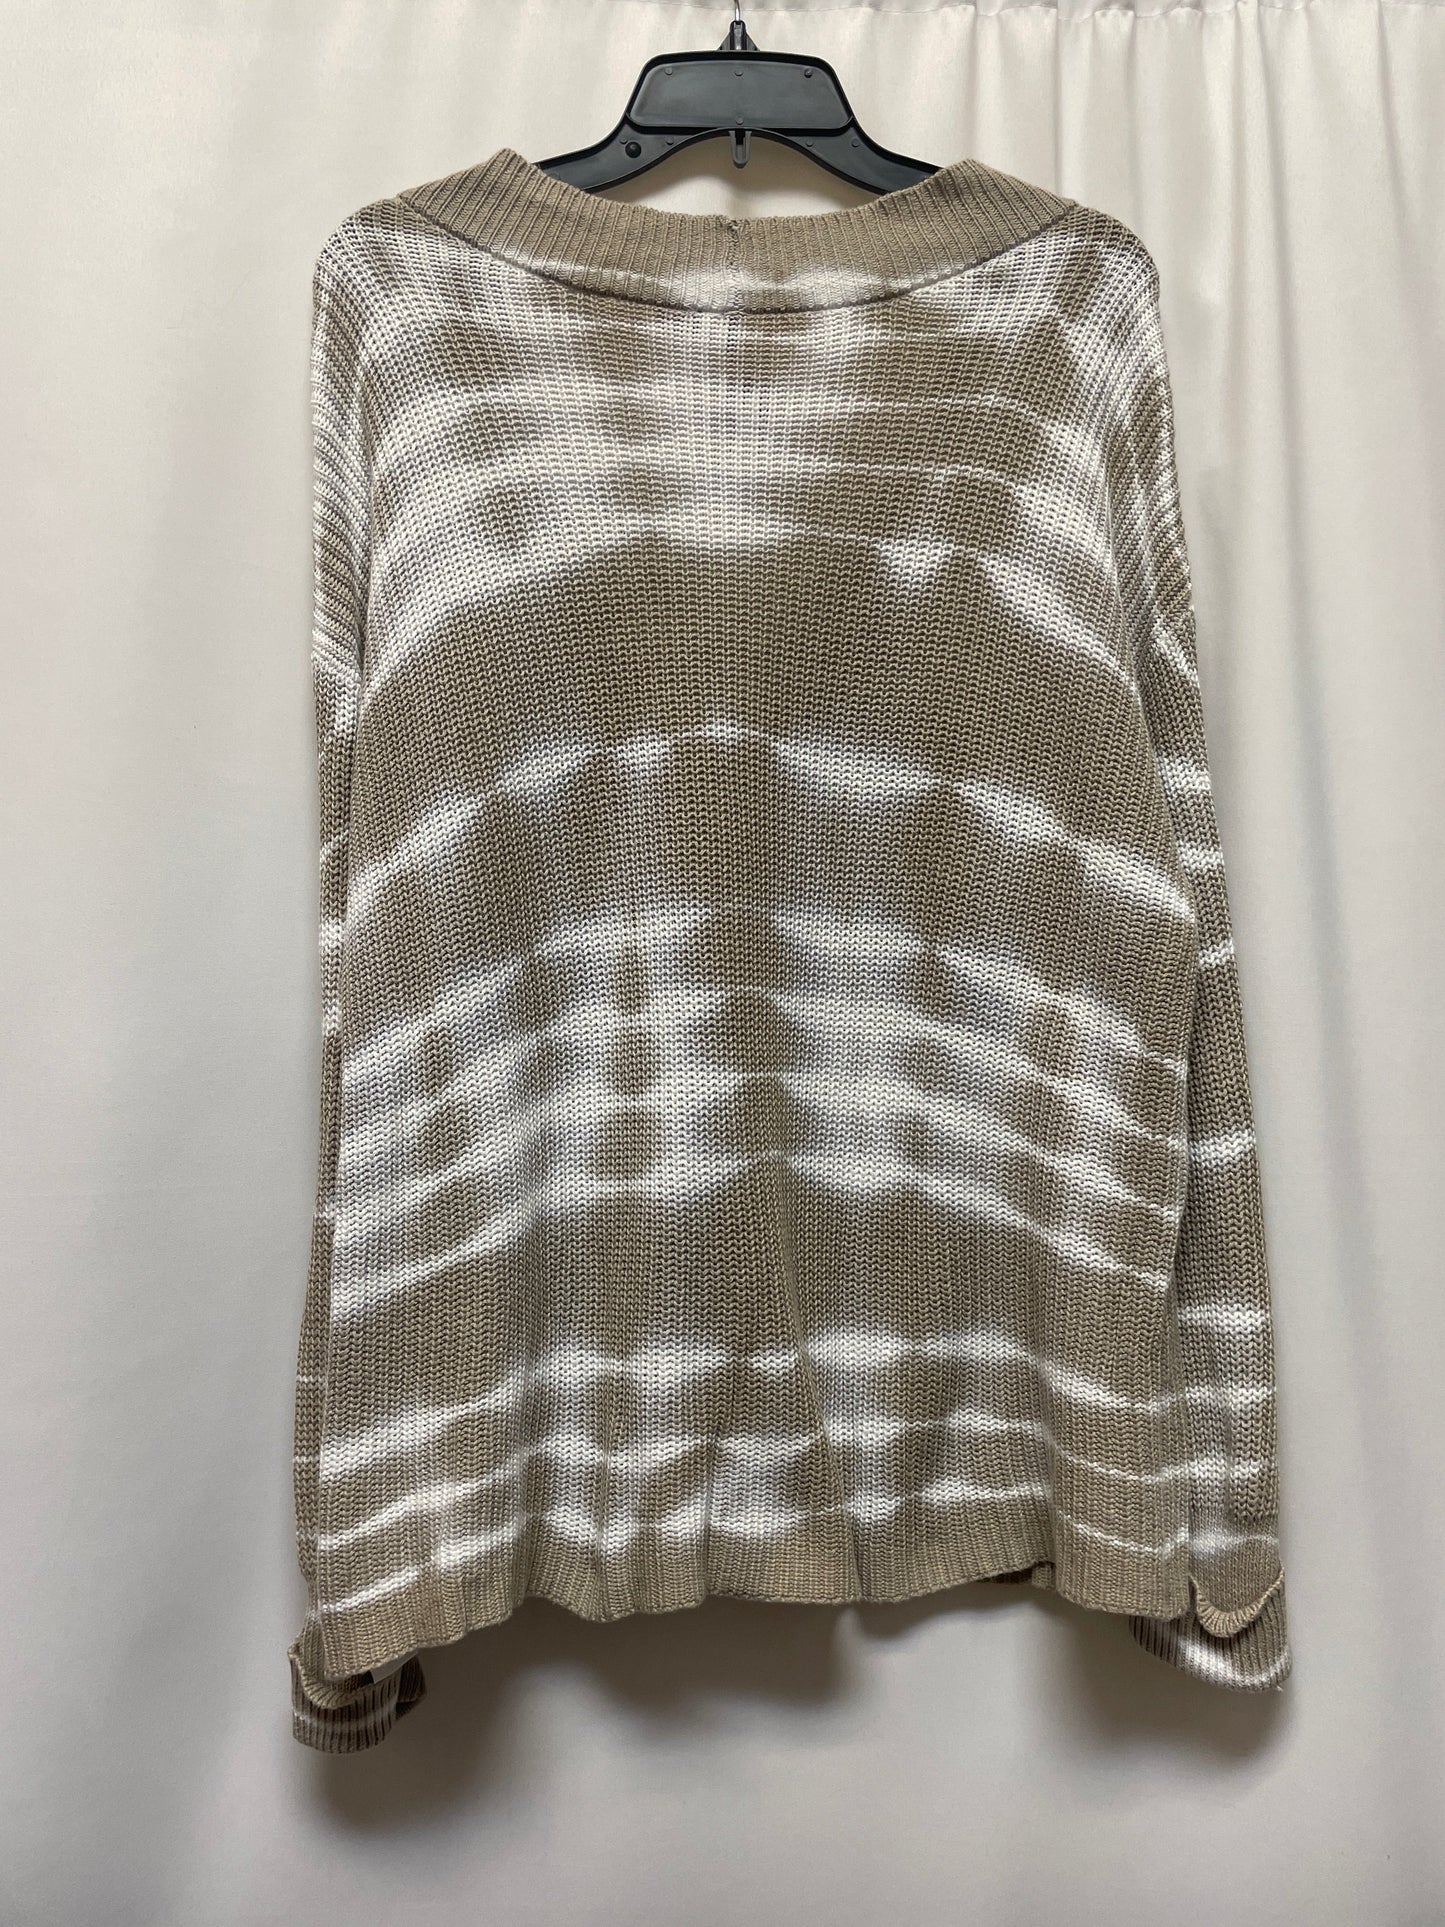 Tan Sweater New Directions, Size 1x